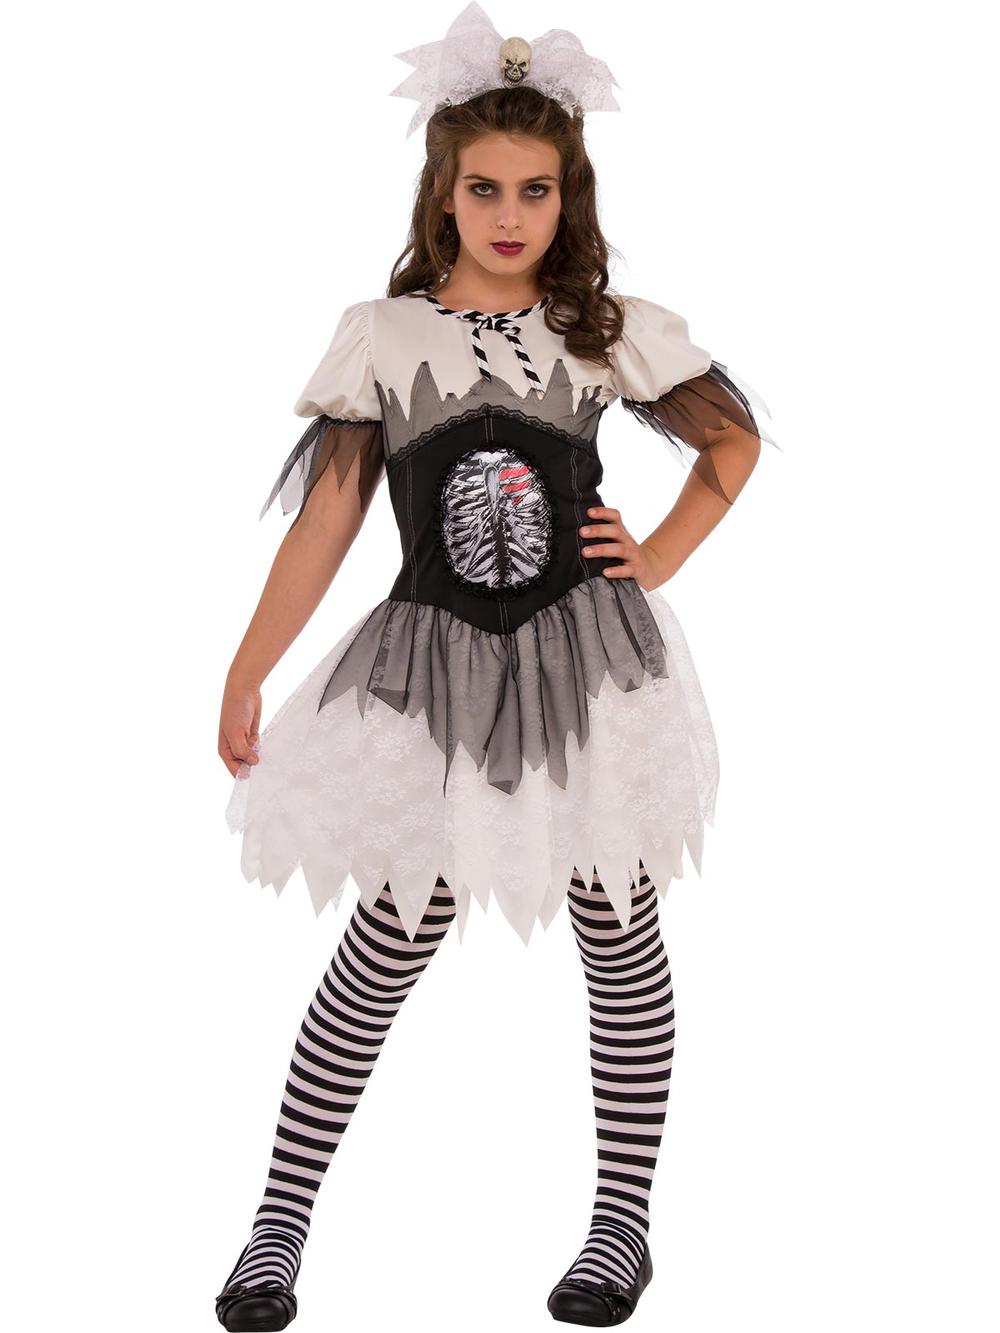 Rubies Open Ribs Teen Costume - Small | Buy online at The Nile